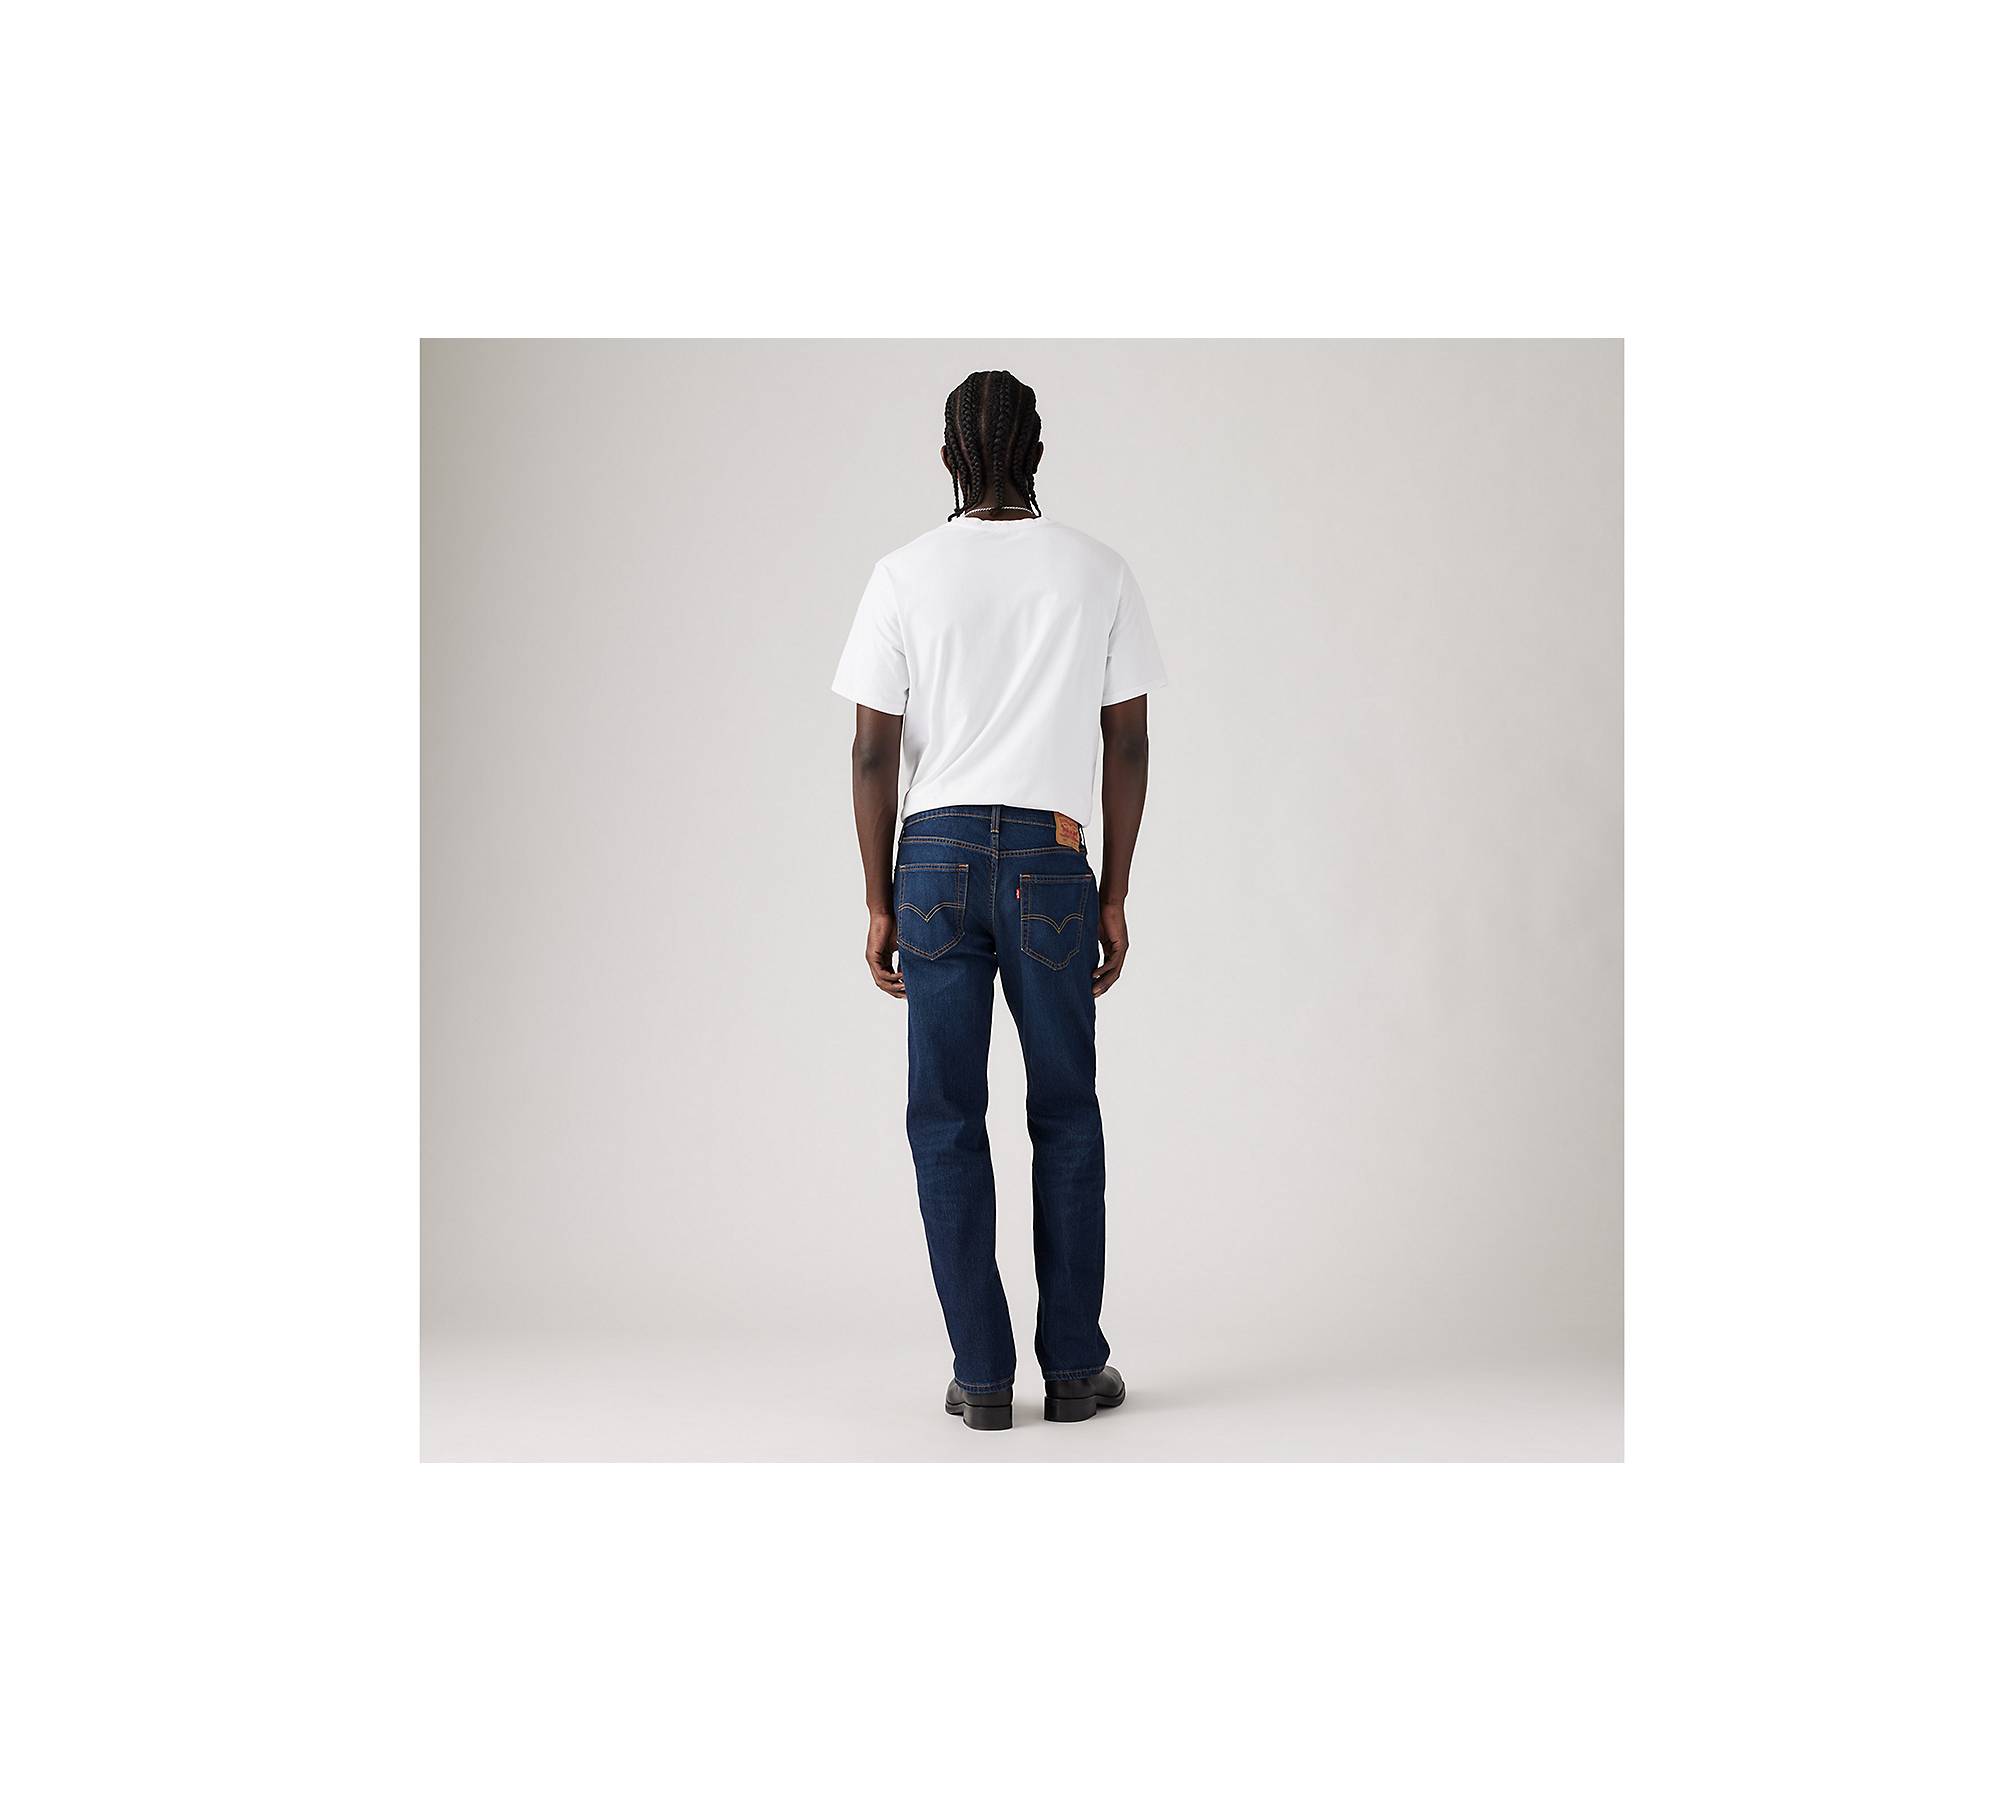 559™ Relaxed Straight Fit Men's Jeans - Dark Wash